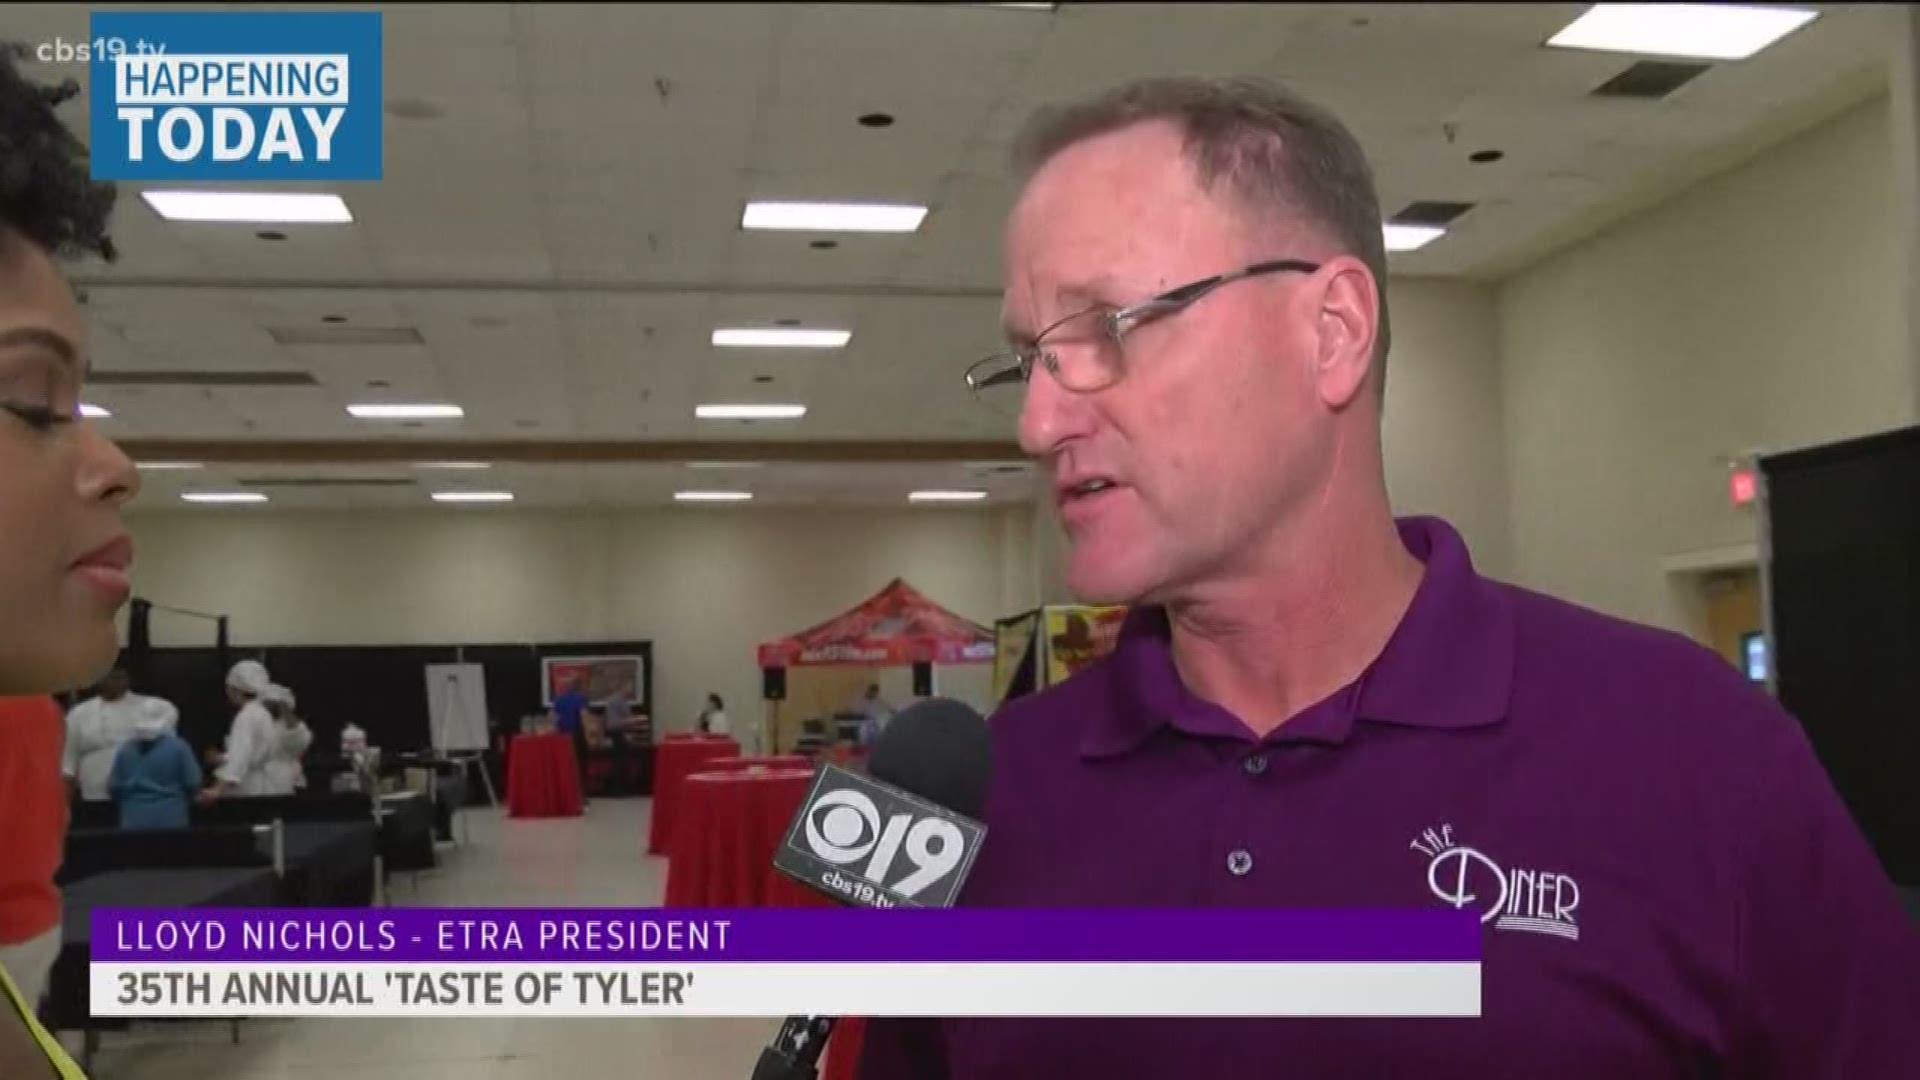 The East Texas Restaurant Association hosted the 35th Annual 'Taste of Tyler' benefiting local culinary programs across East Texas.